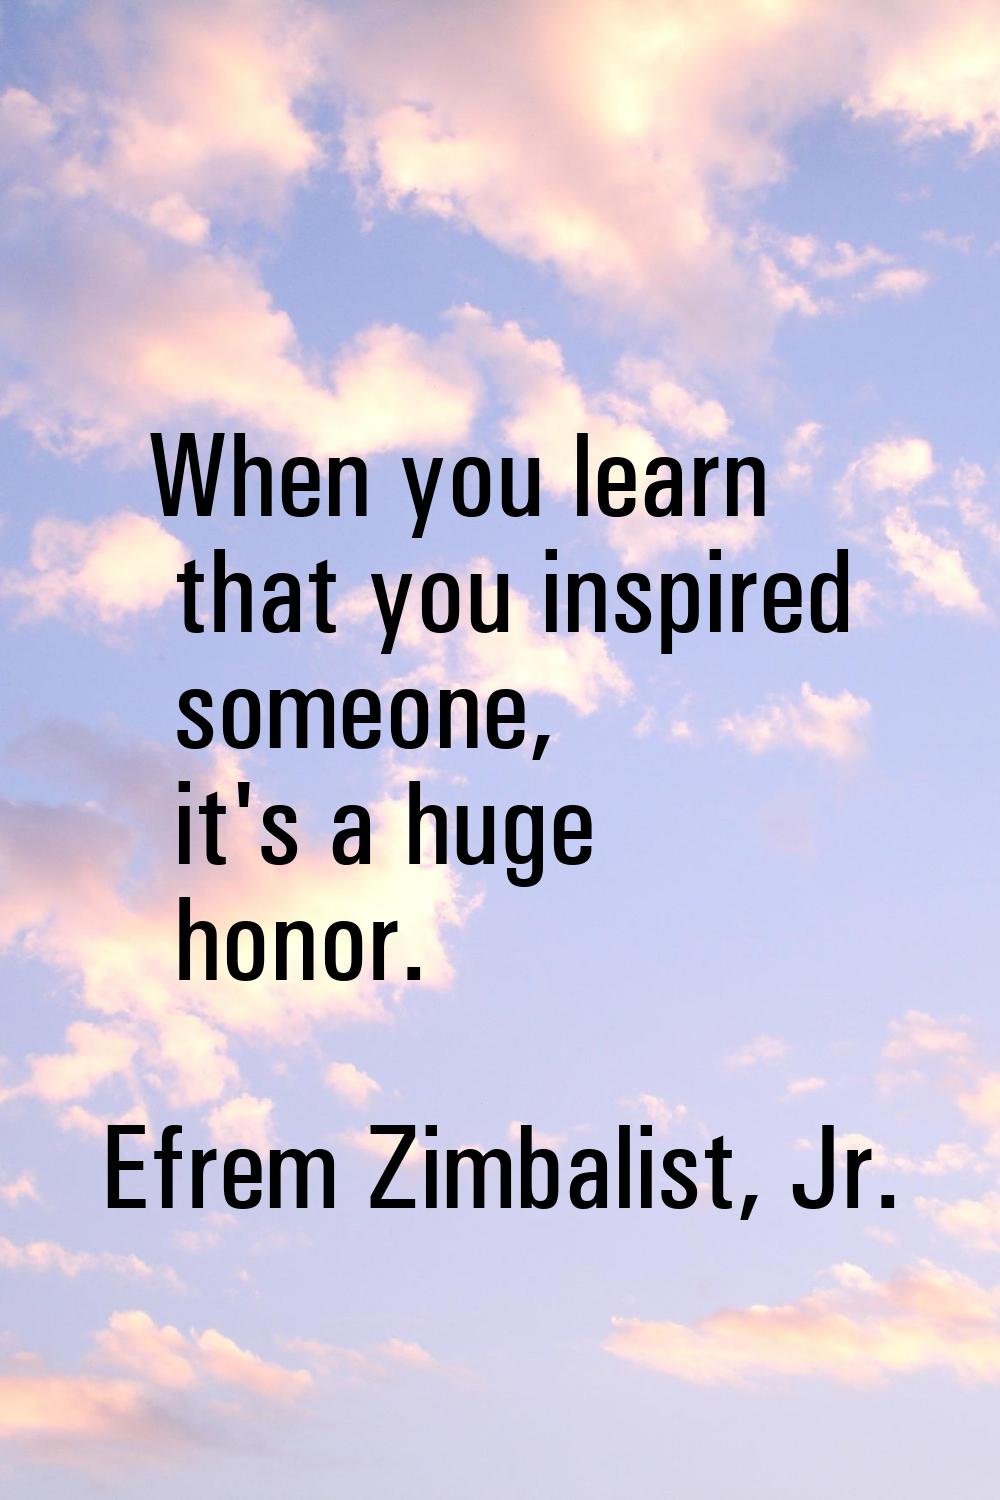 When you learn that you inspired someone, it's a huge honor.